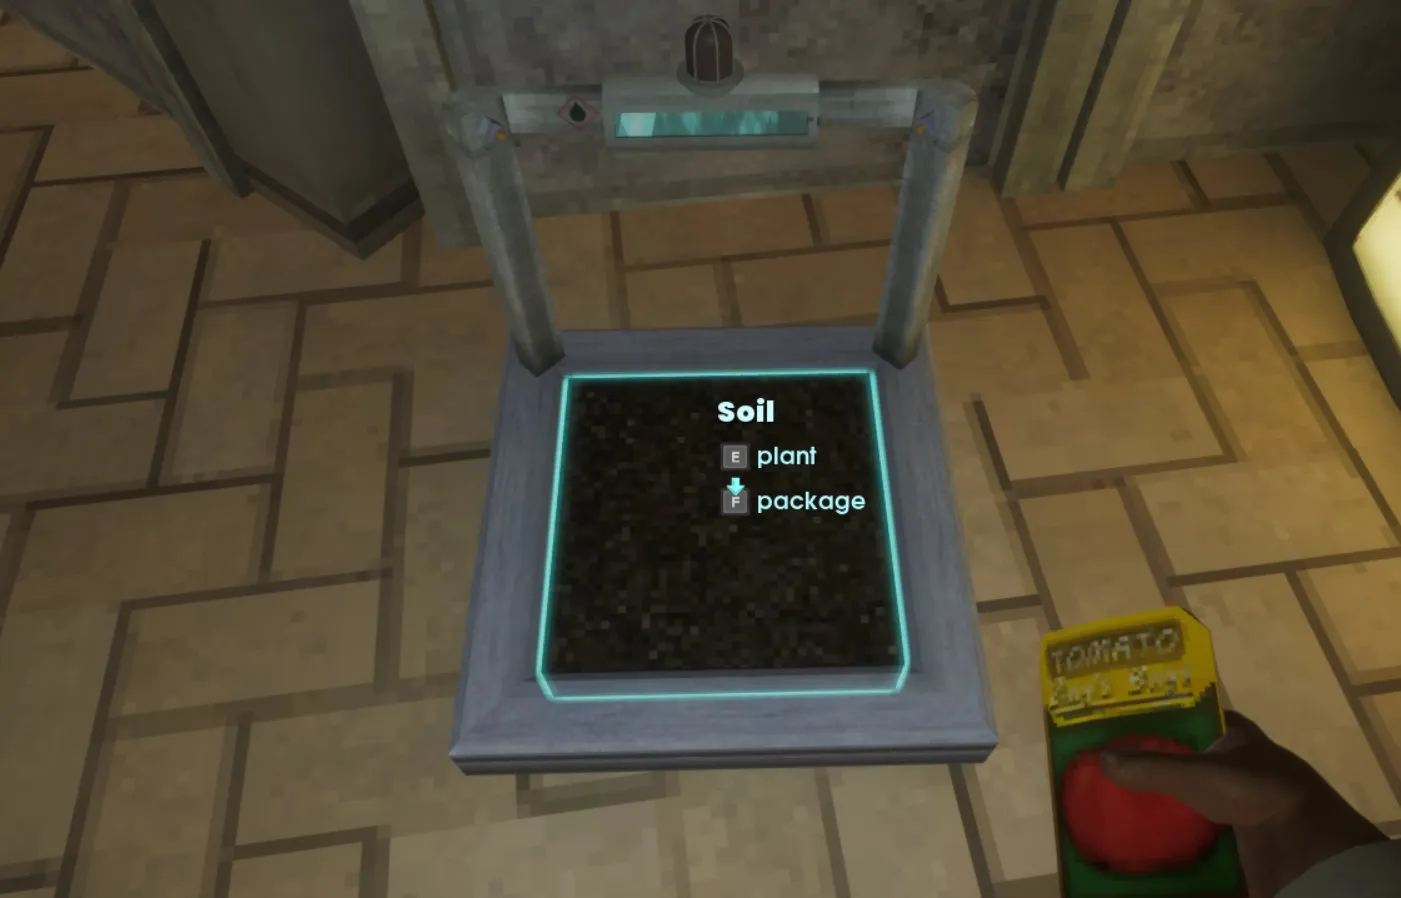 First person POV, a scientist holds a bag of tomato seeds and is prompted to plant them by an on-screen command. 